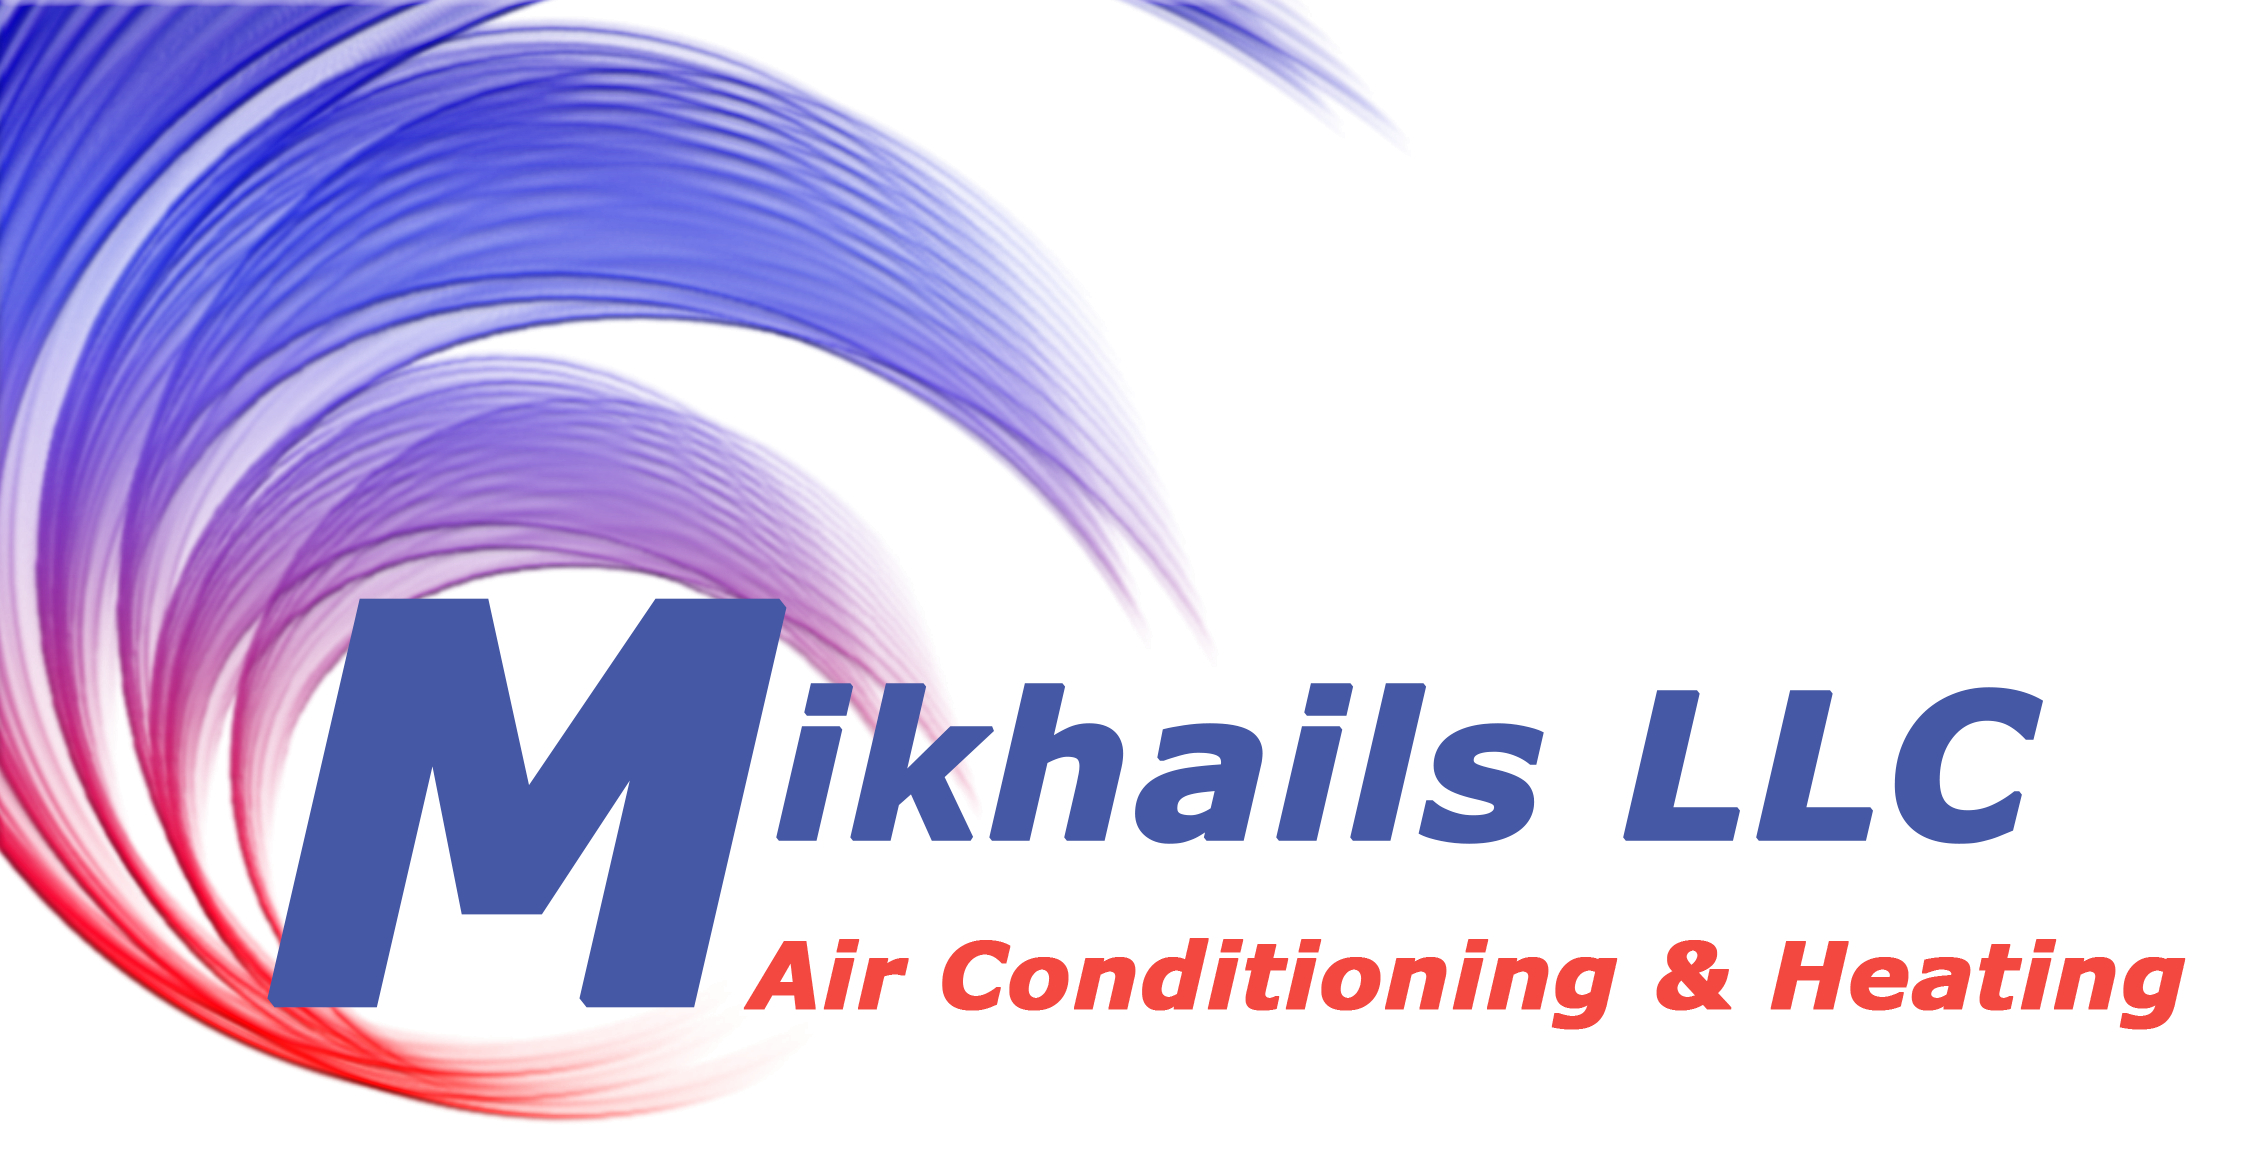 Mikhails-LLC-Air-conditioning-and-heating-Logo.jpg